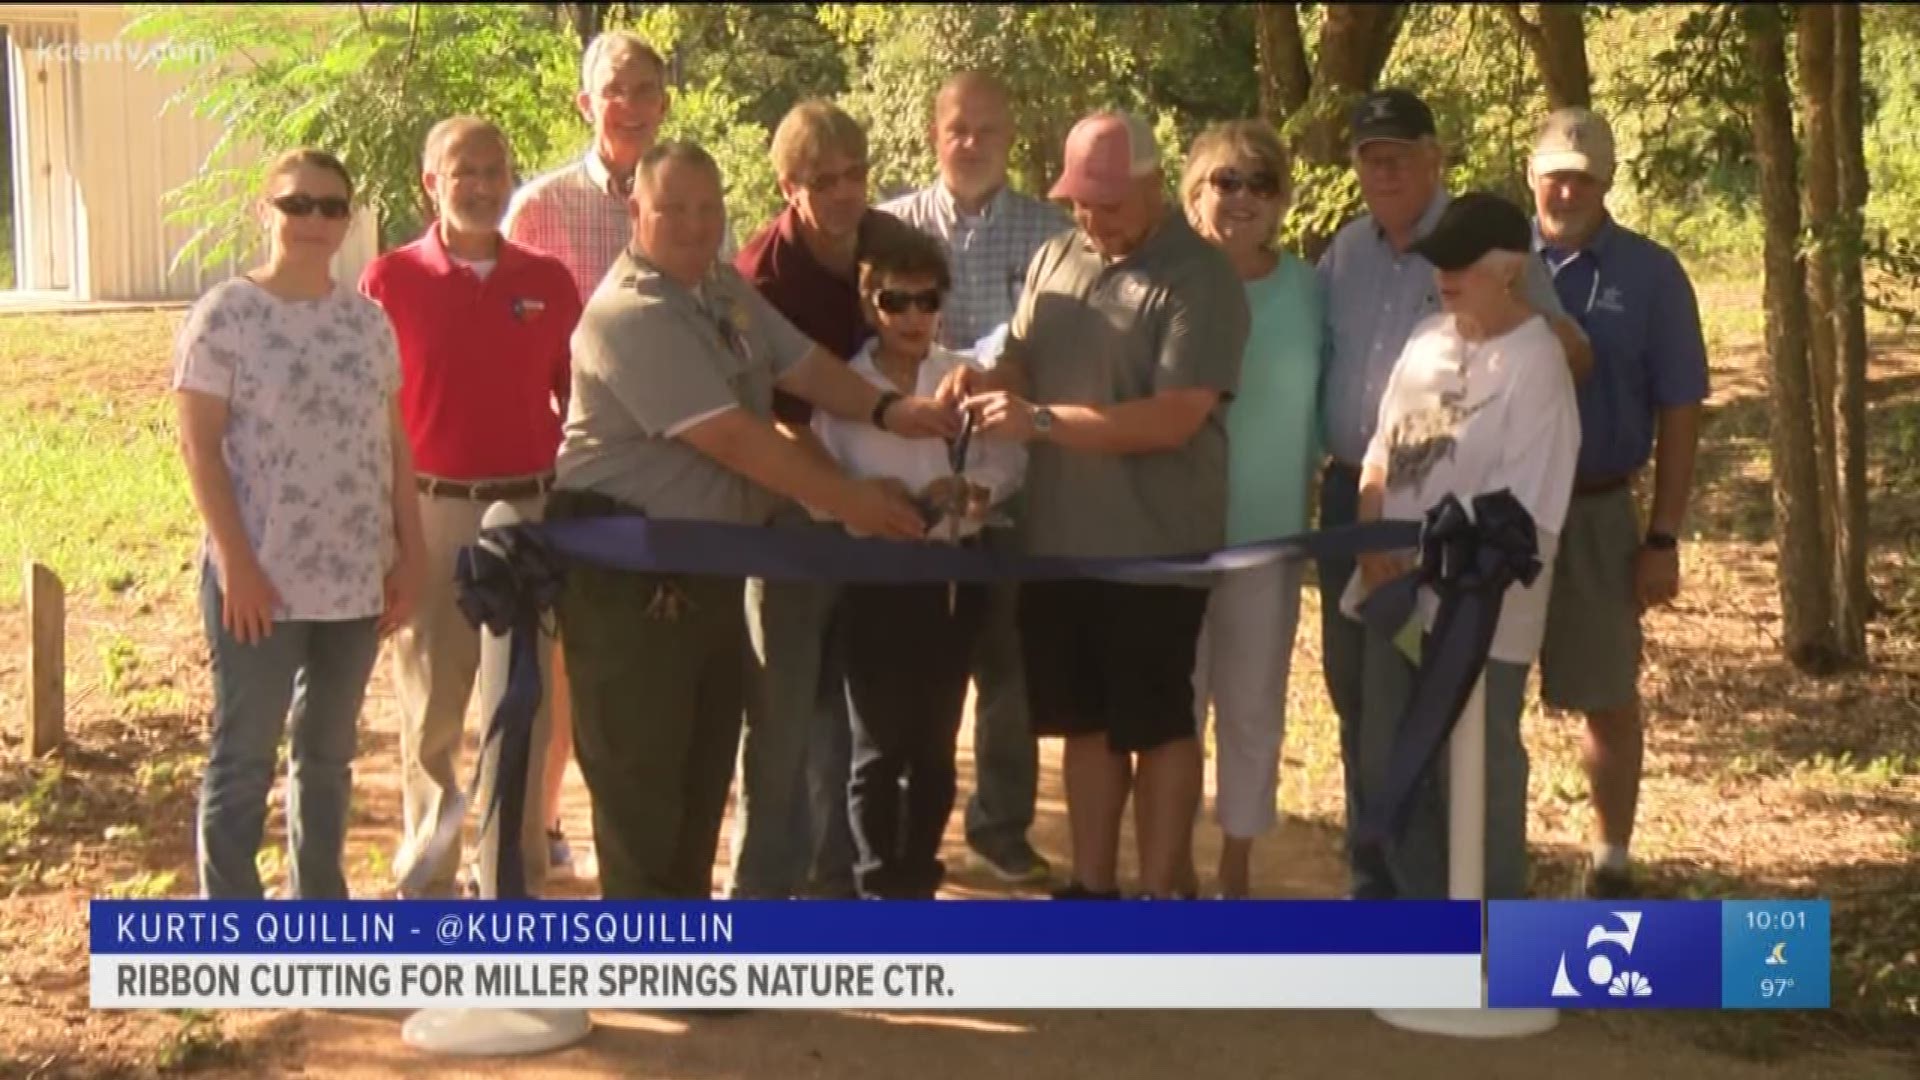 The Temple and Killeen communities came together to celebrate Miller Springs' return.